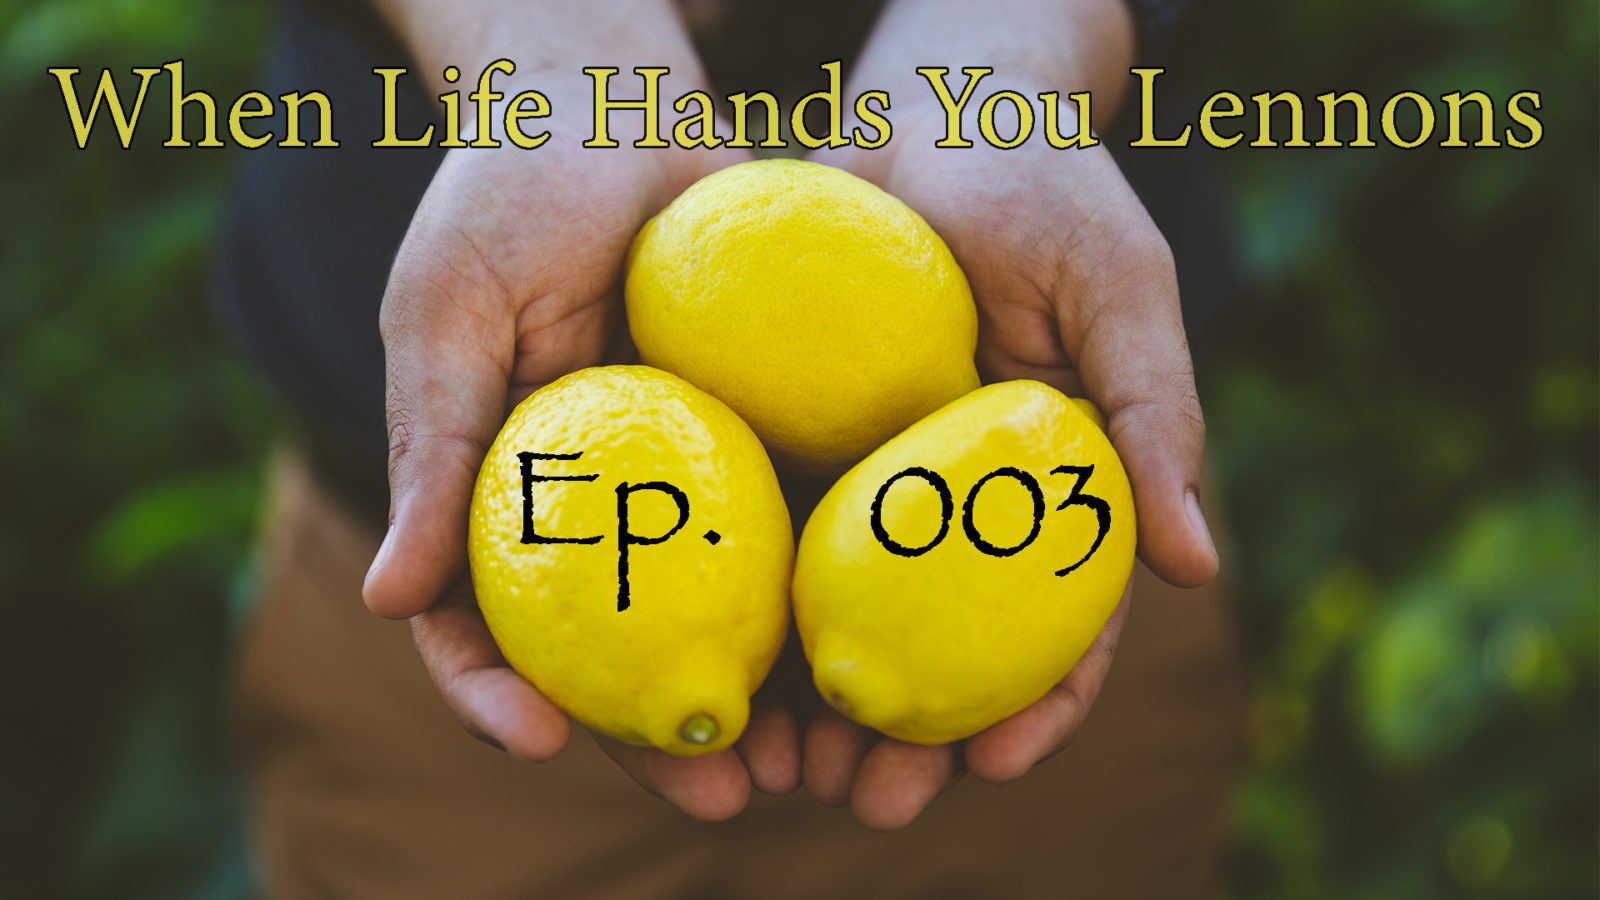 When Life Hands You Lennons Podcast Cover Art Episode - Music Industry - HD Wallpaper 